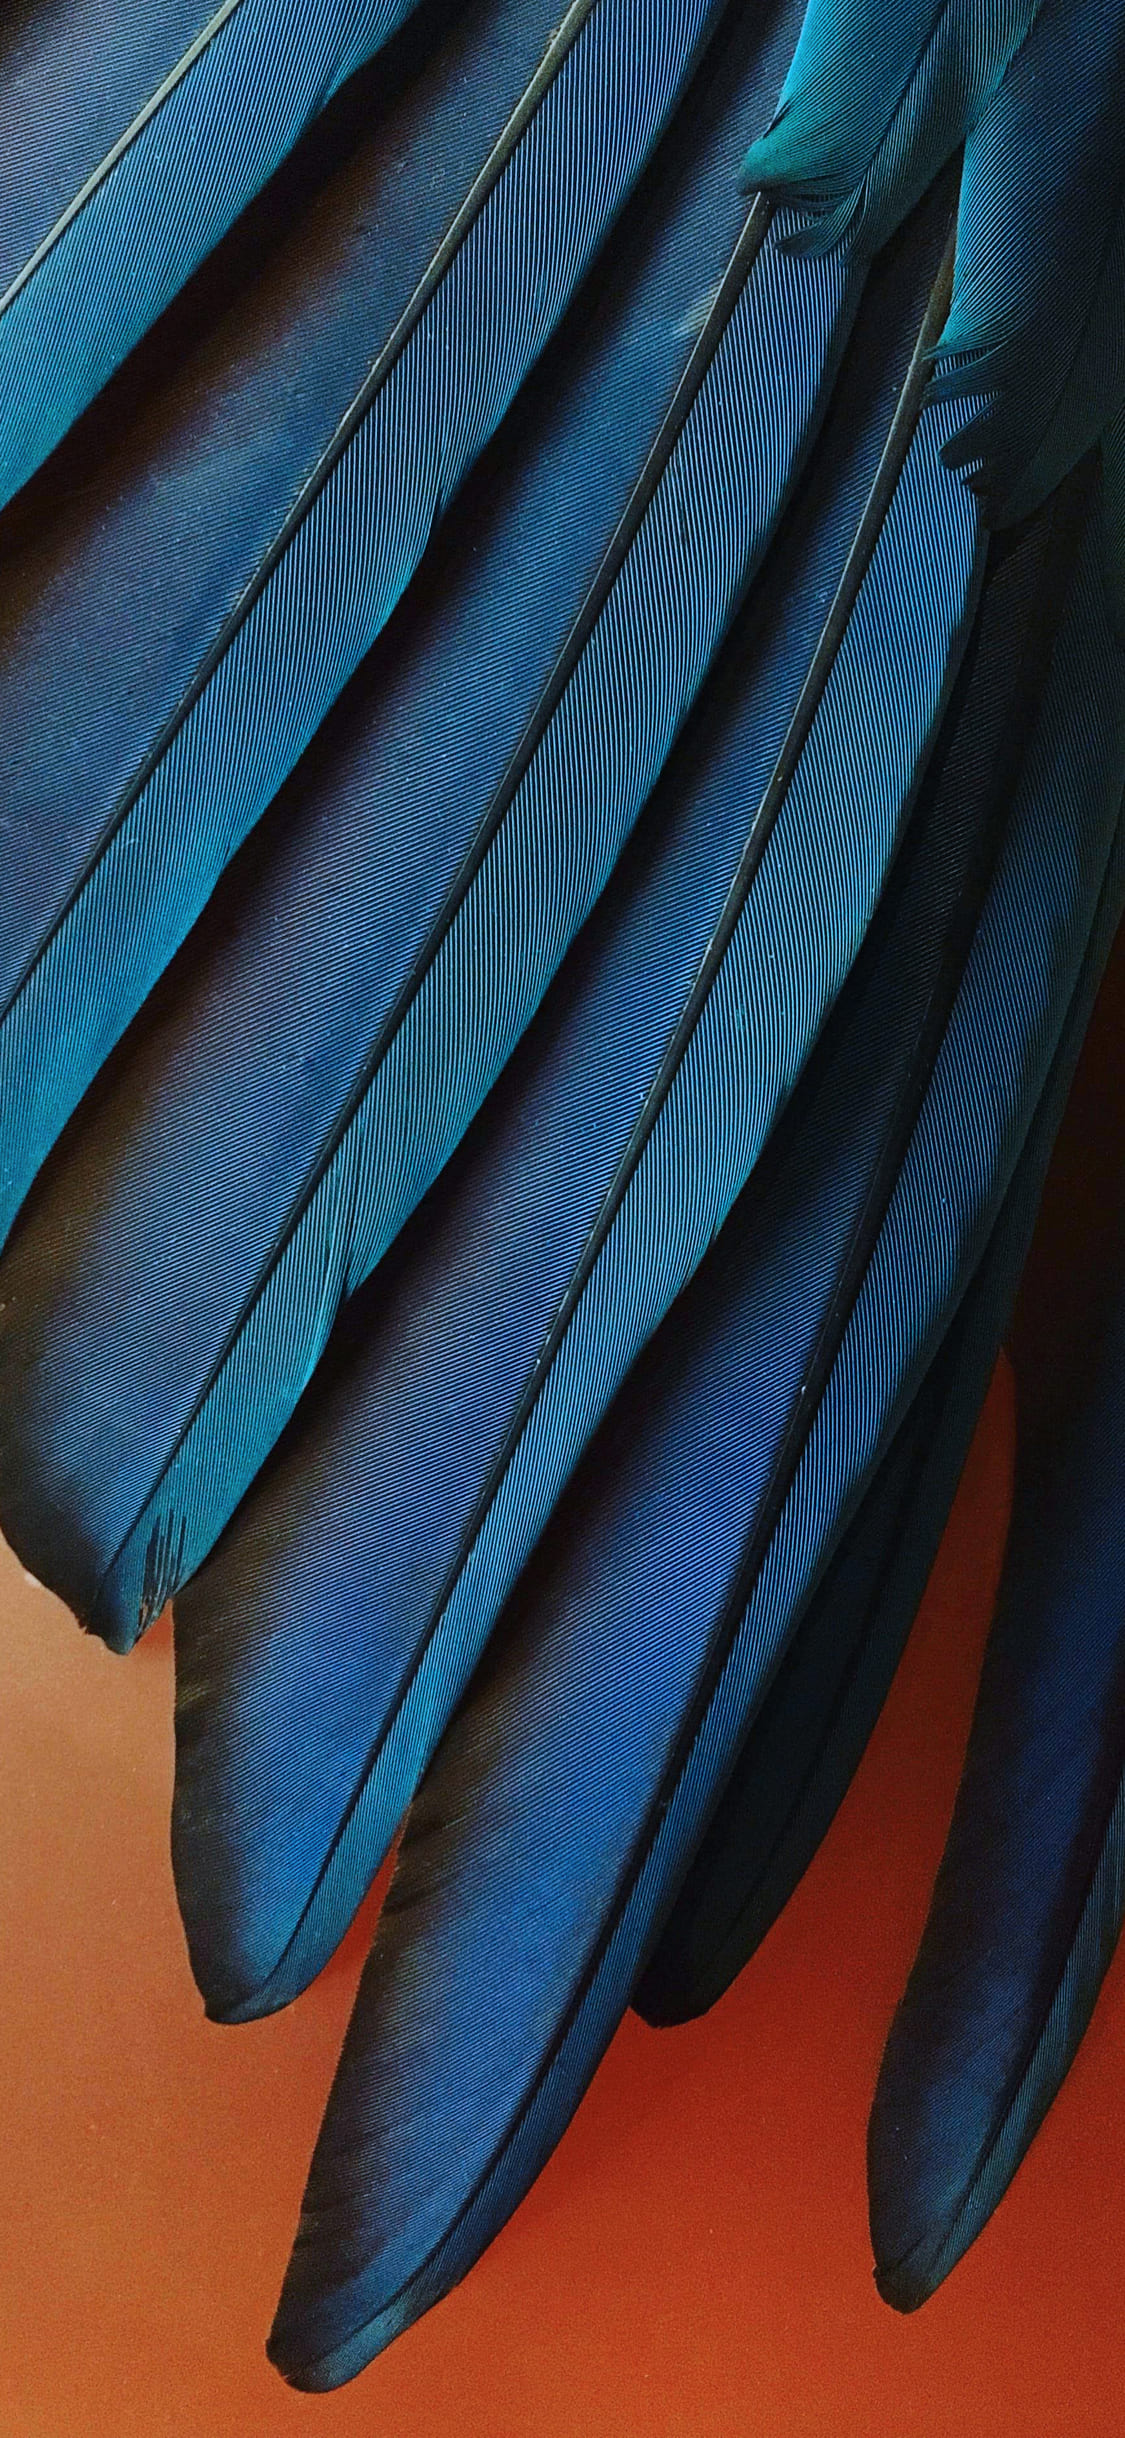 iphone wallpaper,blue,feather,turquoise,teal,aqua